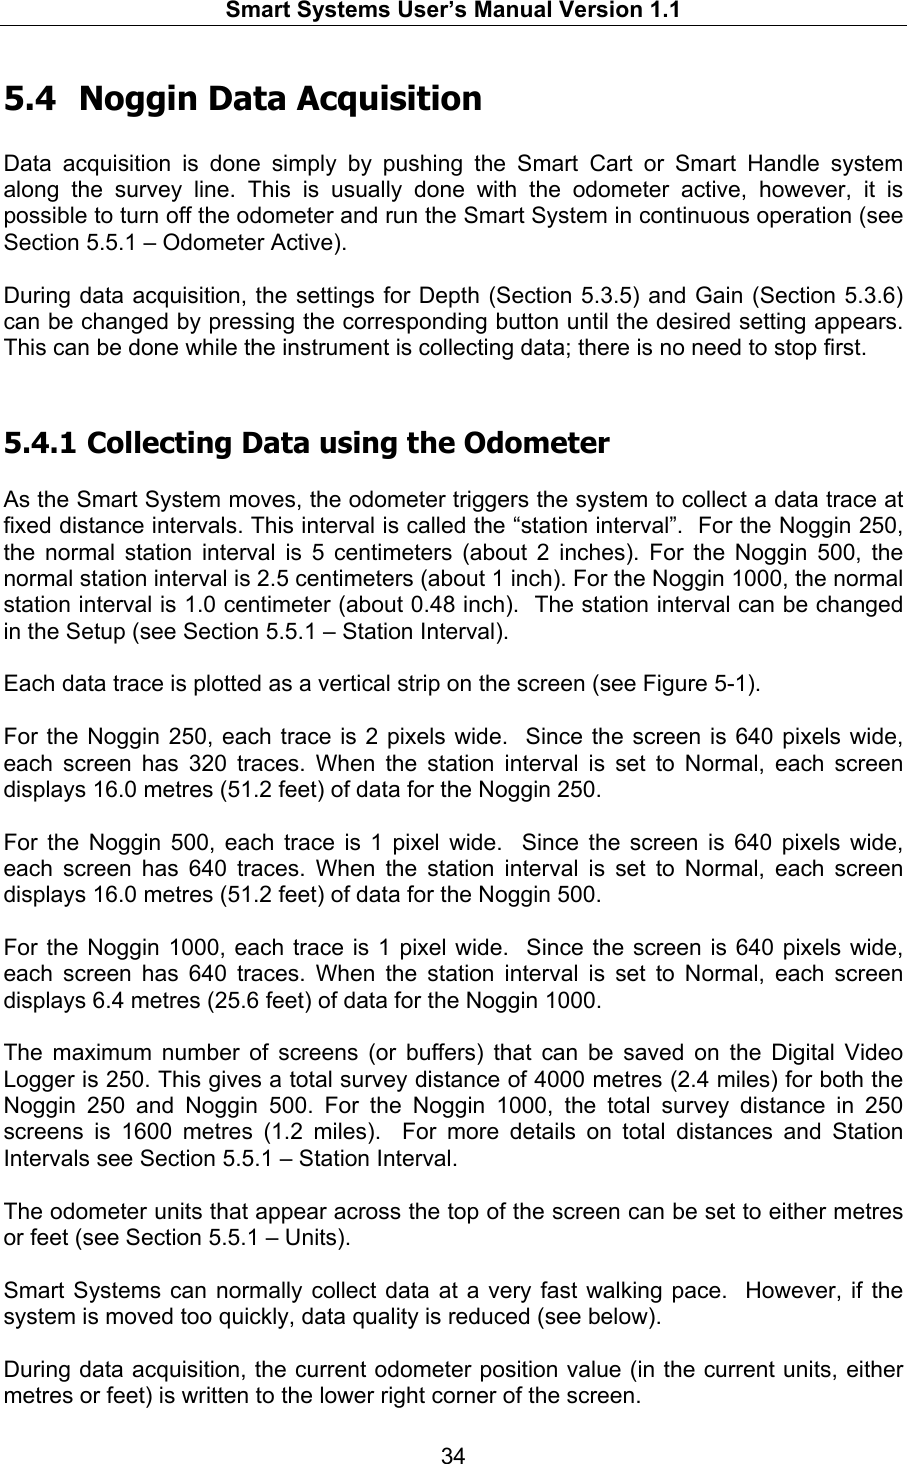   Smart Systems User’s Manual Version 1.1  34  5.4 Noggin Data Acquisition  Data acquisition is done simply by pushing the Smart Cart or Smart Handle system along the survey line. This is usually done with the odometer active, however, it is possible to turn off the odometer and run the Smart System in continuous operation (see Section 5.5.1 – Odometer Active).  During data acquisition, the settings for Depth (Section 5.3.5) and Gain (Section 5.3.6) can be changed by pressing the corresponding button until the desired setting appears. This can be done while the instrument is collecting data; there is no need to stop first.  5.4.1  Collecting Data using the Odometer  As the Smart System moves, the odometer triggers the system to collect a data trace at fixed distance intervals. This interval is called the “station interval”.  For the Noggin 250, the normal station interval is 5 centimeters (about 2 inches). For the Noggin 500, the normal station interval is 2.5 centimeters (about 1 inch). For the Noggin 1000, the normal station interval is 1.0 centimeter (about 0.48 inch).  The station interval can be changed in the Setup (see Section 5.5.1 – Station Interval).   Each data trace is plotted as a vertical strip on the screen (see Figure 5-1).   For the Noggin 250, each trace is 2 pixels wide.  Since the screen is 640 pixels wide, each screen has 320 traces. When the station interval is set to Normal, each screen displays 16.0 metres (51.2 feet) of data for the Noggin 250.  For the Noggin 500, each trace is 1 pixel wide.  Since the screen is 640 pixels wide, each screen has 640 traces. When the station interval is set to Normal, each screen displays 16.0 metres (51.2 feet) of data for the Noggin 500.  For the Noggin 1000, each trace is 1 pixel wide.  Since the screen is 640 pixels wide, each screen has 640 traces. When the station interval is set to Normal, each screen displays 6.4 metres (25.6 feet) of data for the Noggin 1000.  The maximum number of screens (or buffers) that can be saved on the Digital Video Logger is 250. This gives a total survey distance of 4000 metres (2.4 miles) for both the Noggin 250 and Noggin 500. For the Noggin 1000, the total survey distance in 250 screens is 1600 metres (1.2 miles).  For more details on total distances and Station Intervals see Section 5.5.1 – Station Interval.  The odometer units that appear across the top of the screen can be set to either metres or feet (see Section 5.5.1 – Units).  Smart Systems can normally collect data at a very fast walking pace.  However, if the system is moved too quickly, data quality is reduced (see below).  During data acquisition, the current odometer position value (in the current units, either metres or feet) is written to the lower right corner of the screen. 